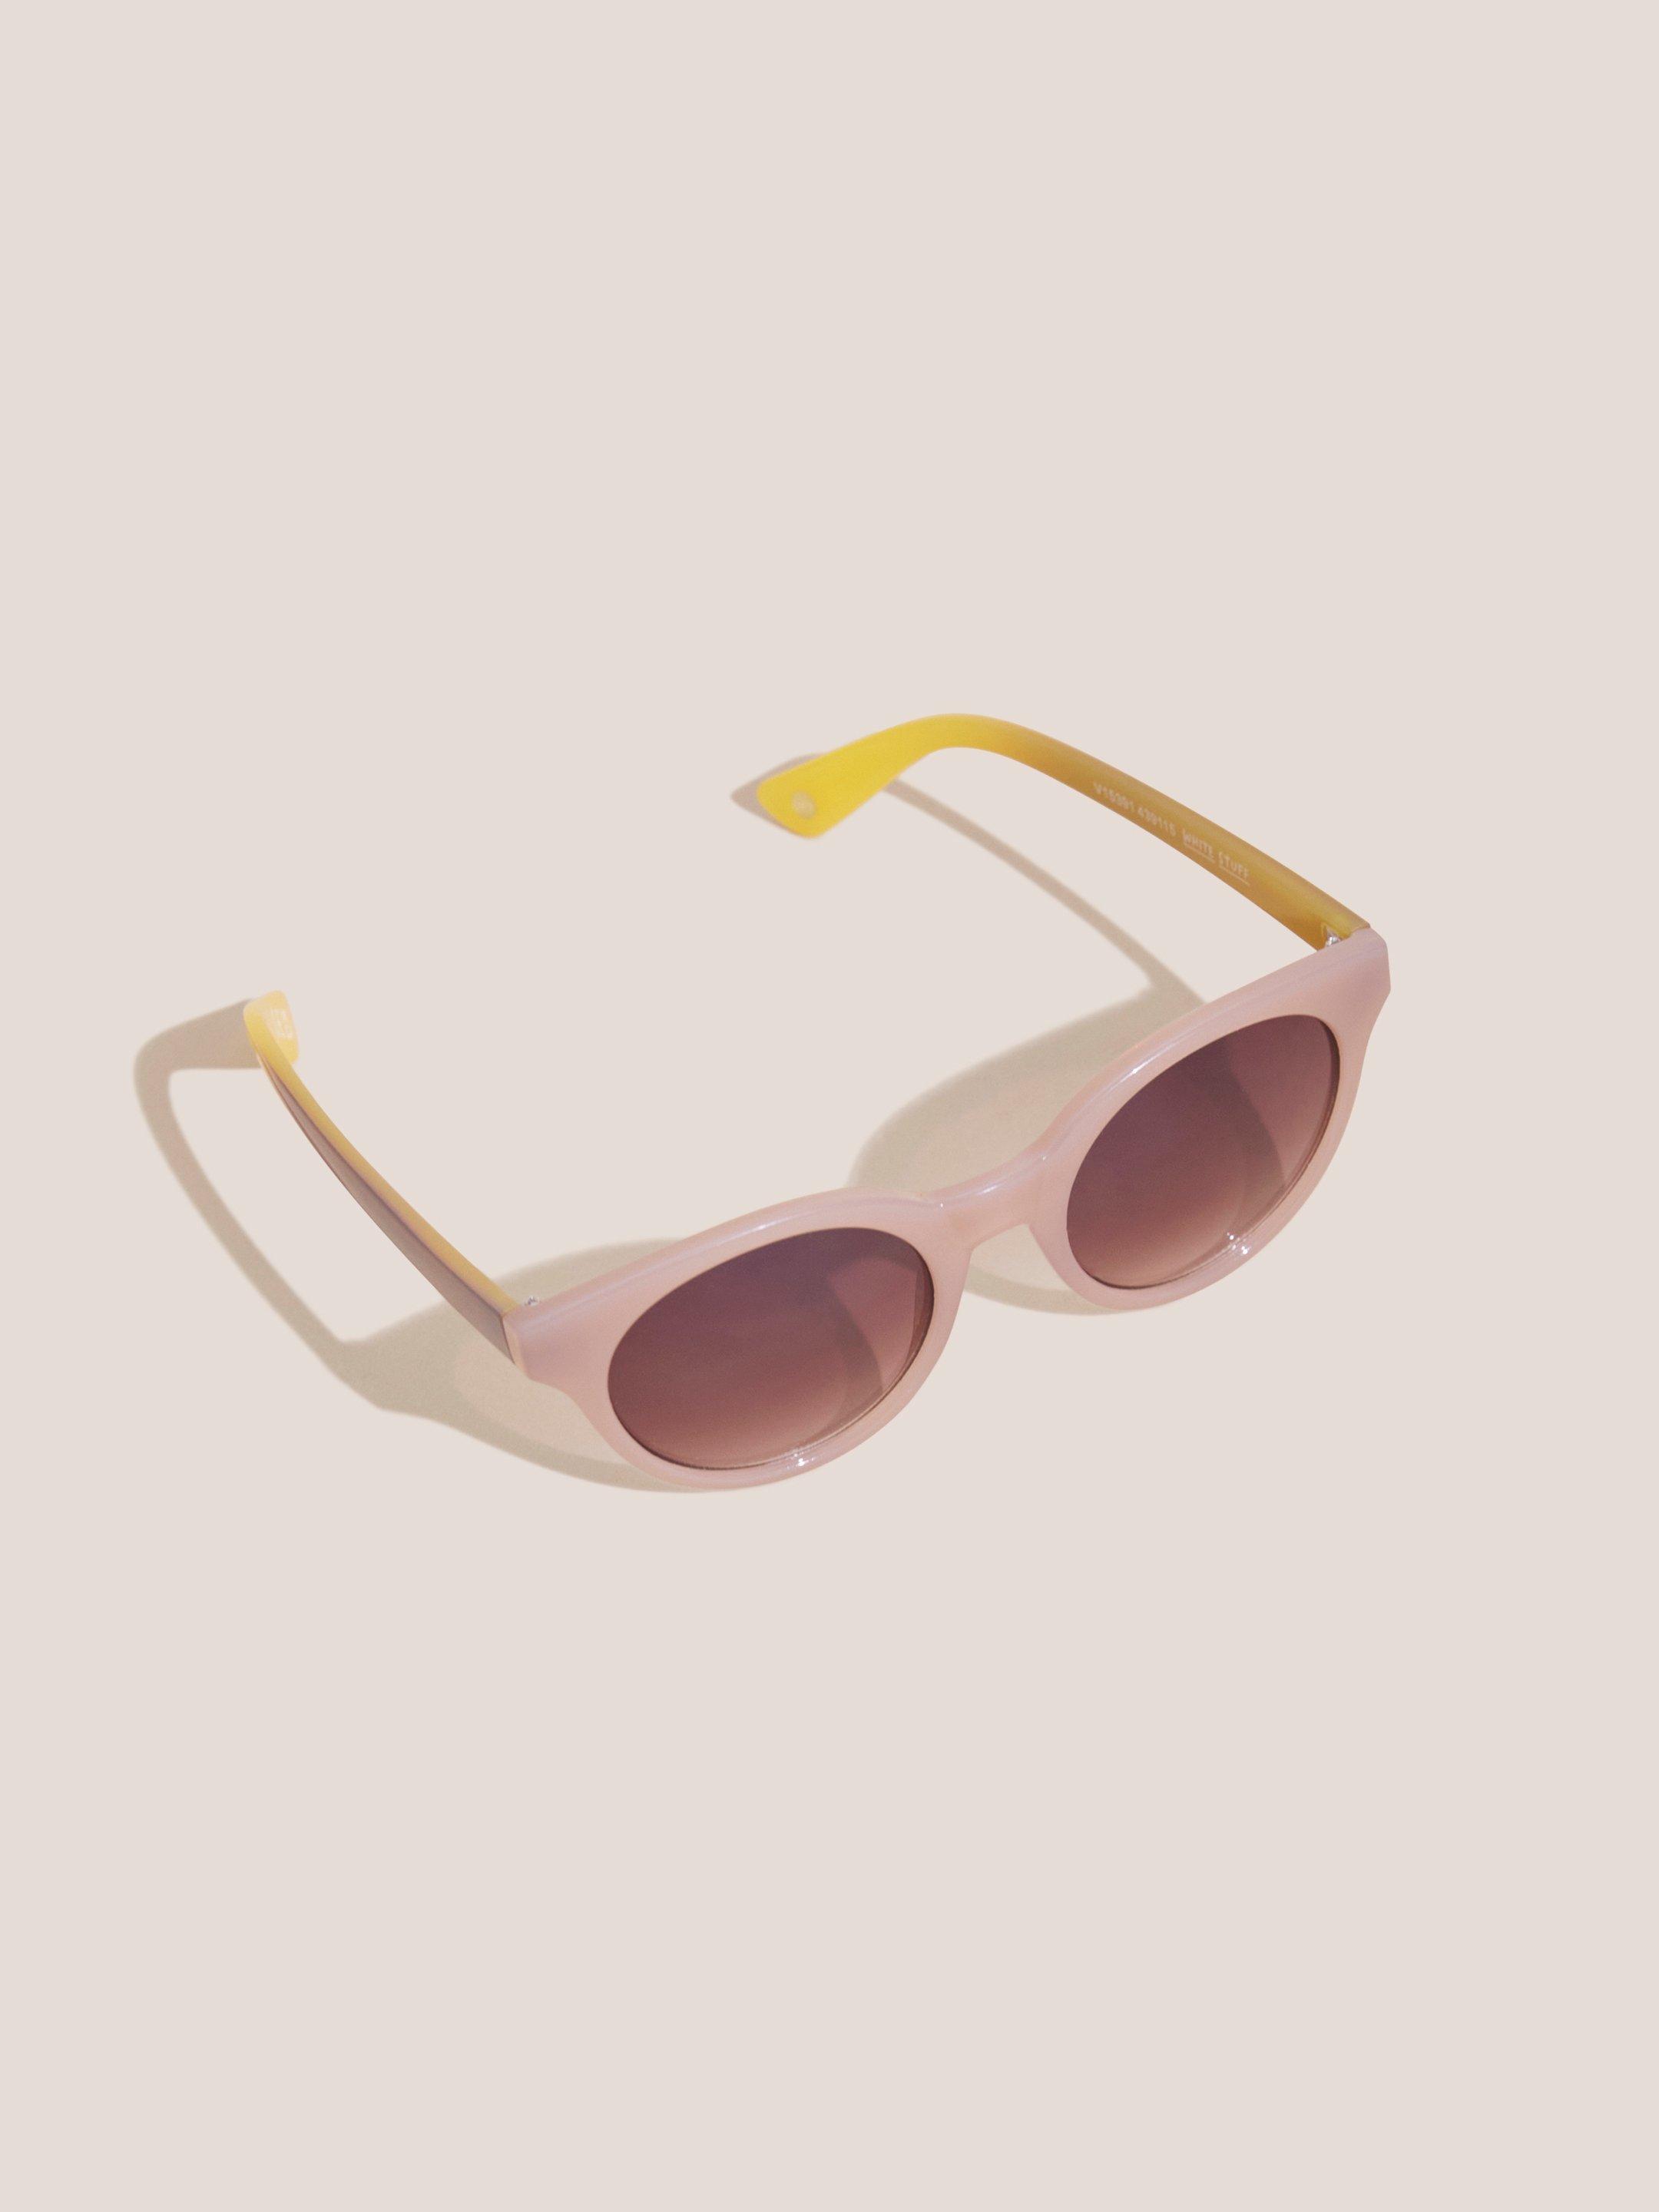 Round Preppy Sunglasses in DUS PINK - FLAT DETAIL